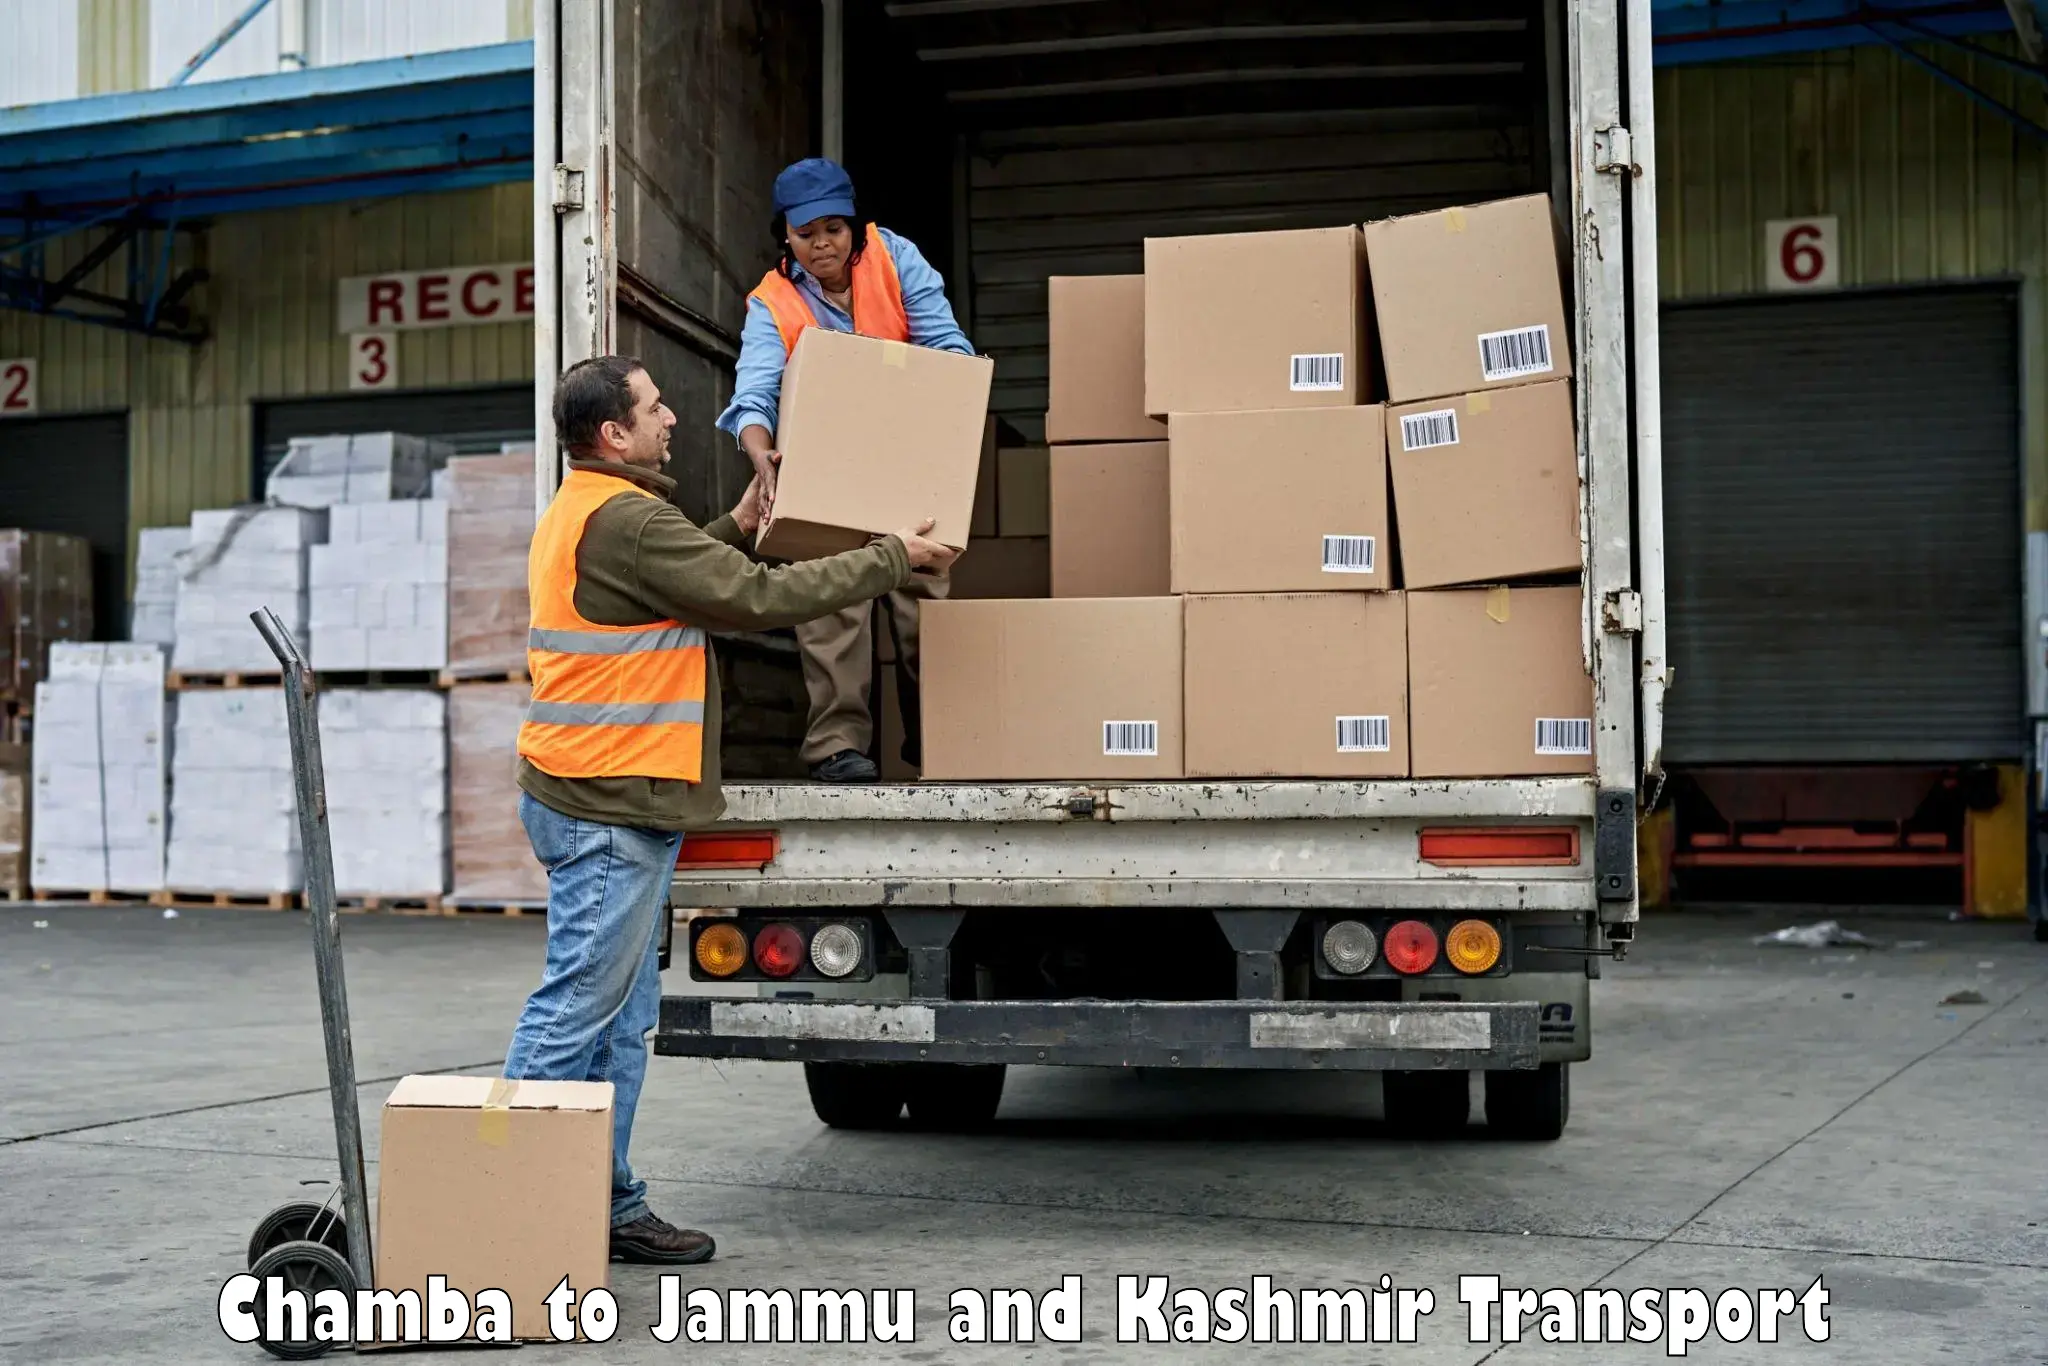 Furniture transport service in Chamba to Udhampur